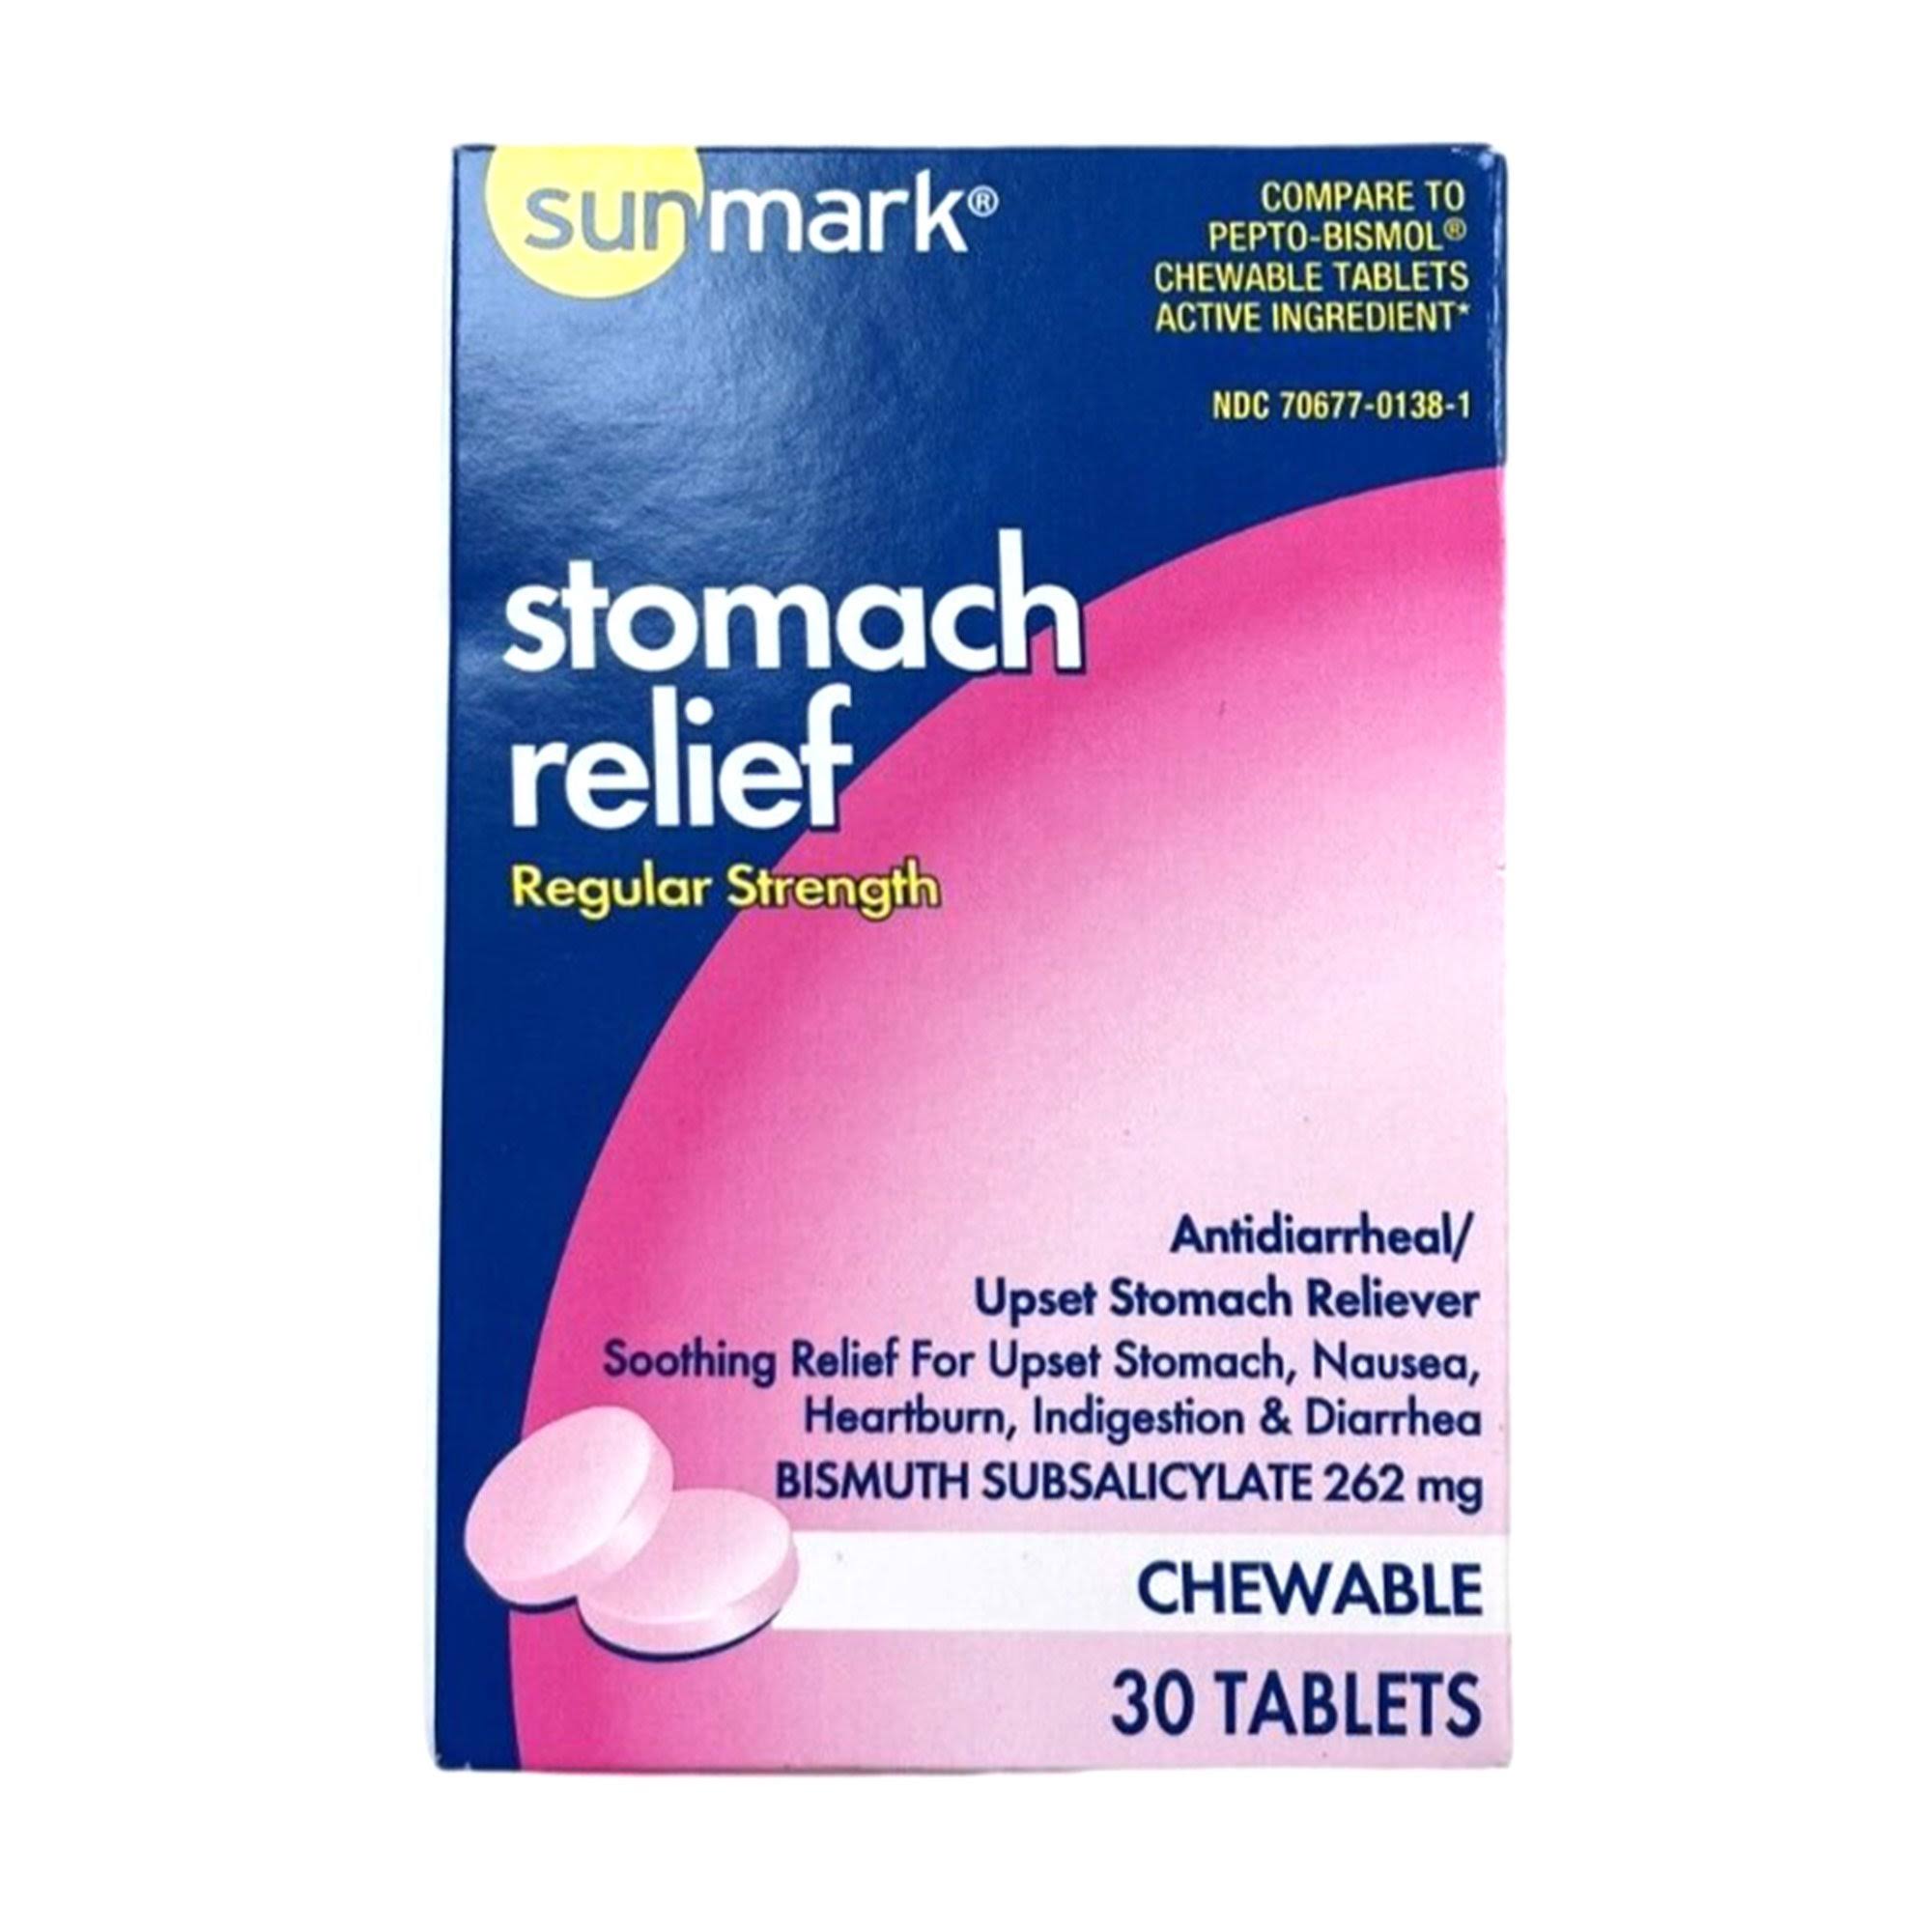 Stomach Relief Chewable Regular Strength 30 Chews by Sunmark